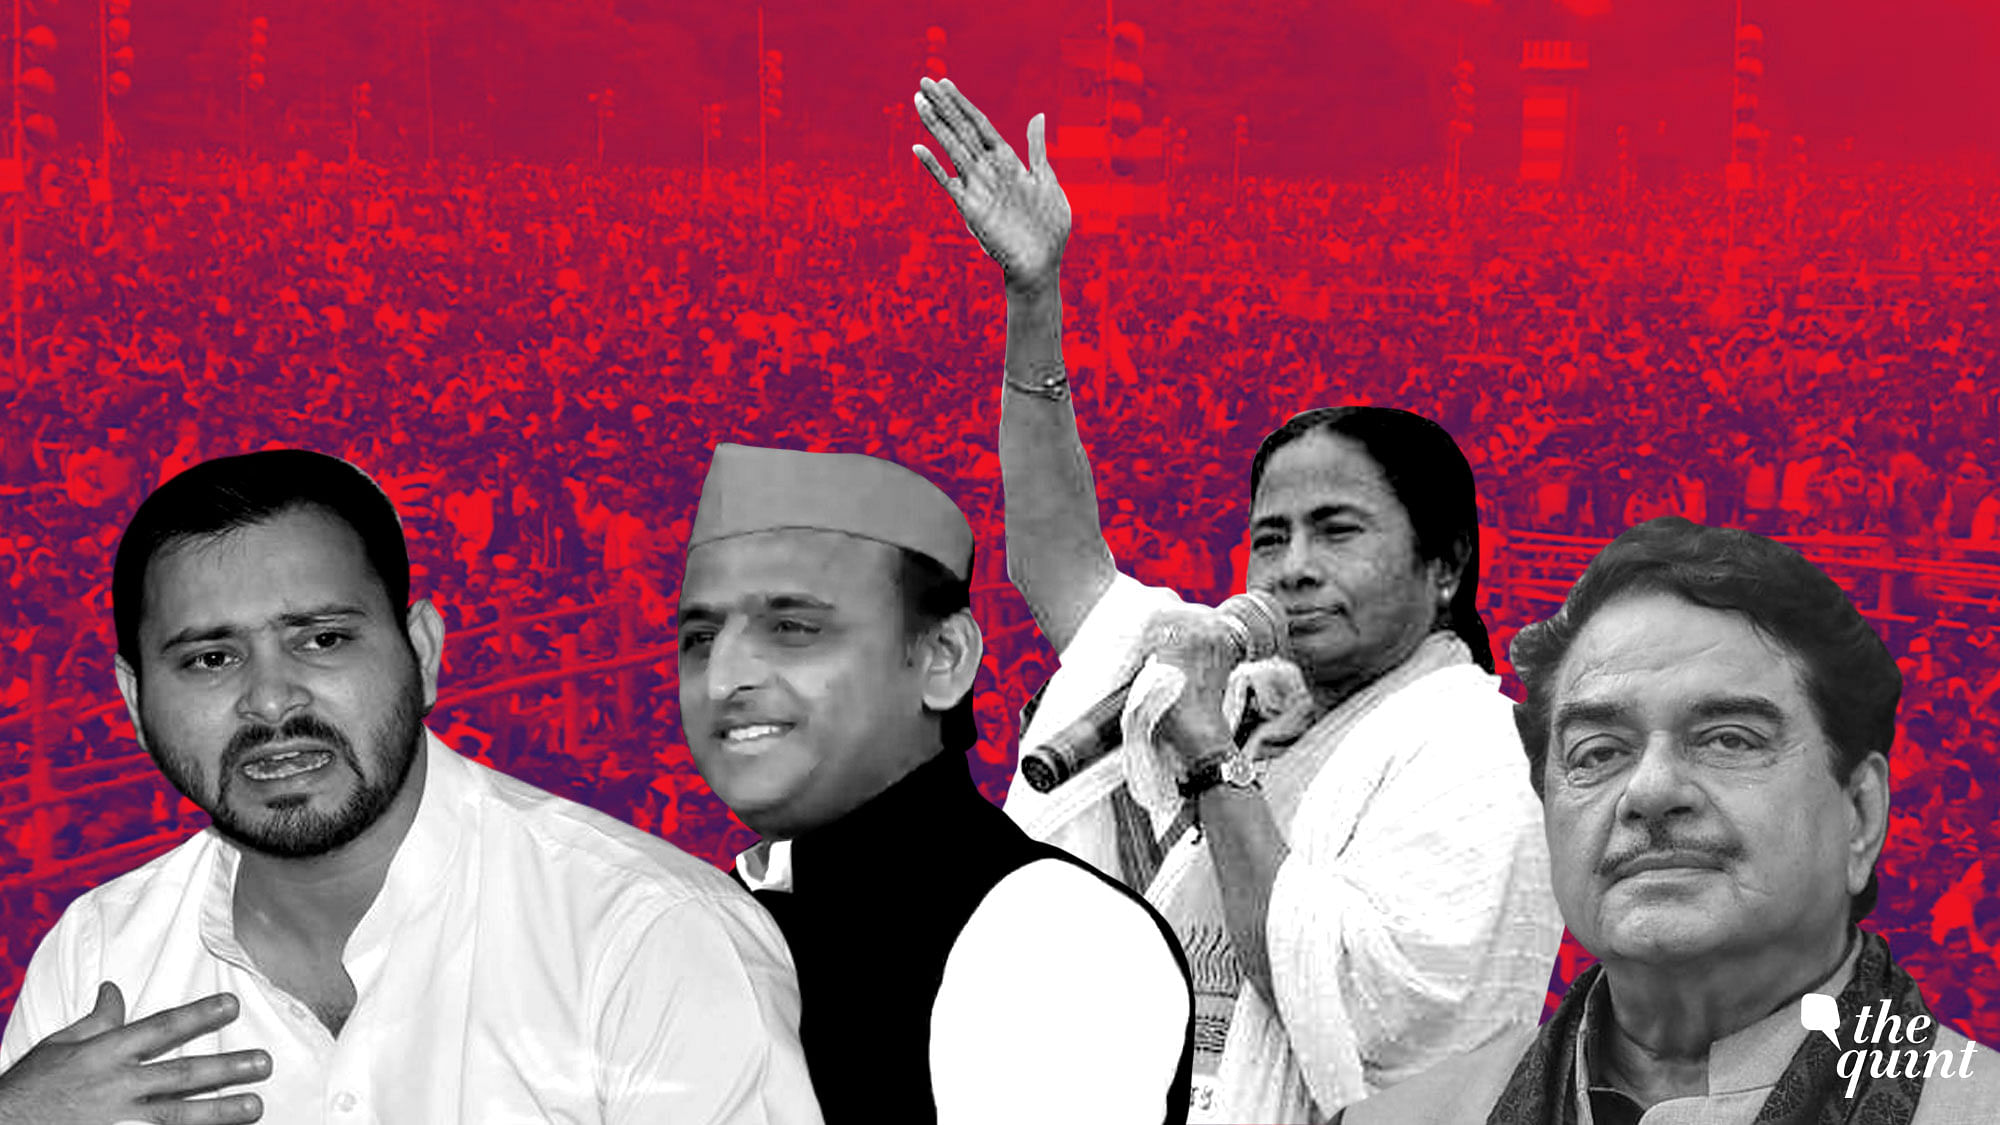 The opposition unity rally was Mamata Banerjee’s first move on the 2019 election chessboard. Mr. Modi, it’s your turn now.